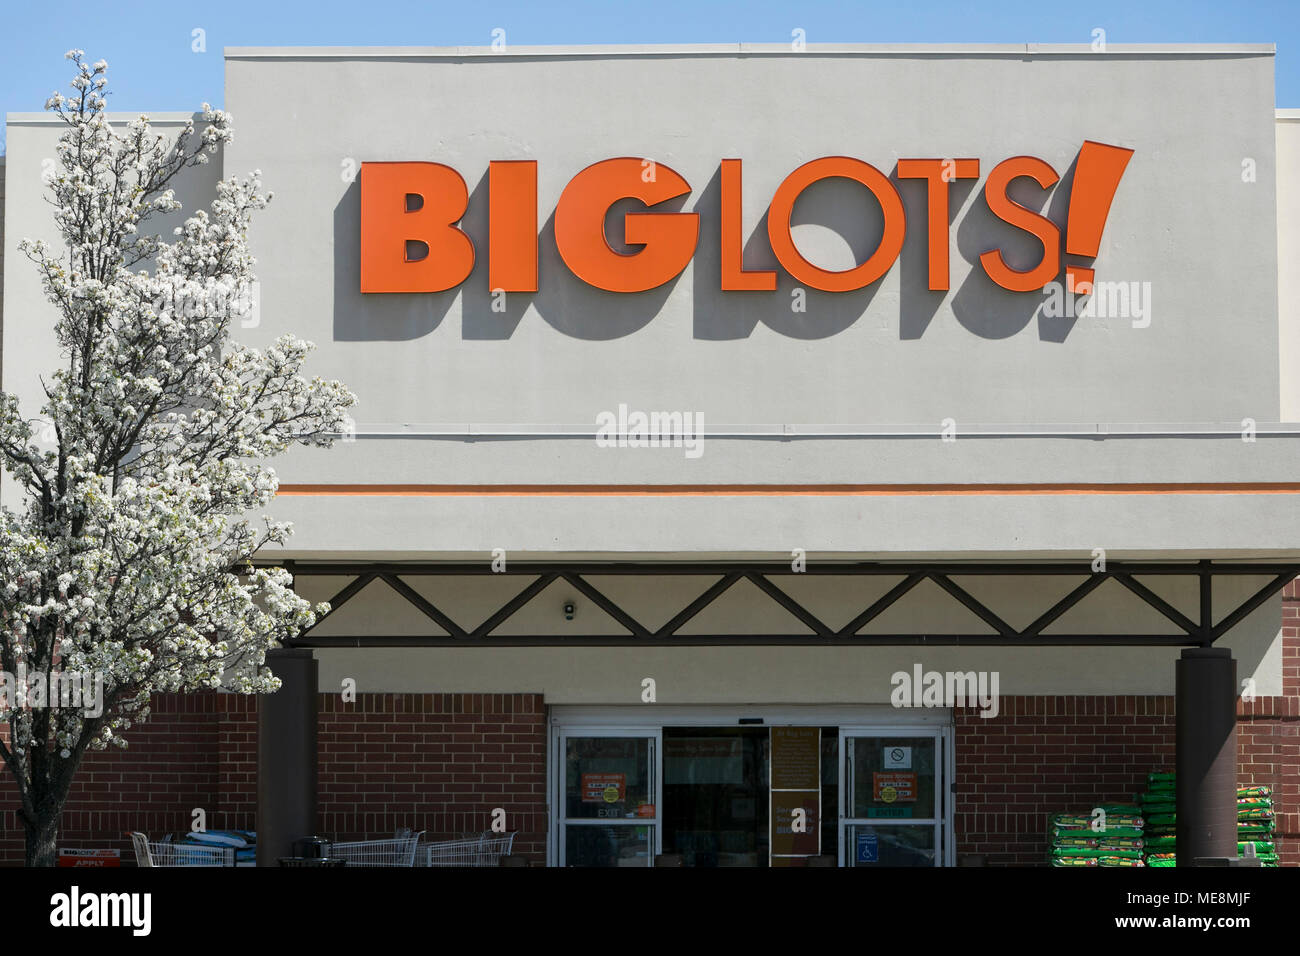 A logo sign outside of a Big Lots retail store location in Columbia, Maryland on April 20, 2018. Stock Photo